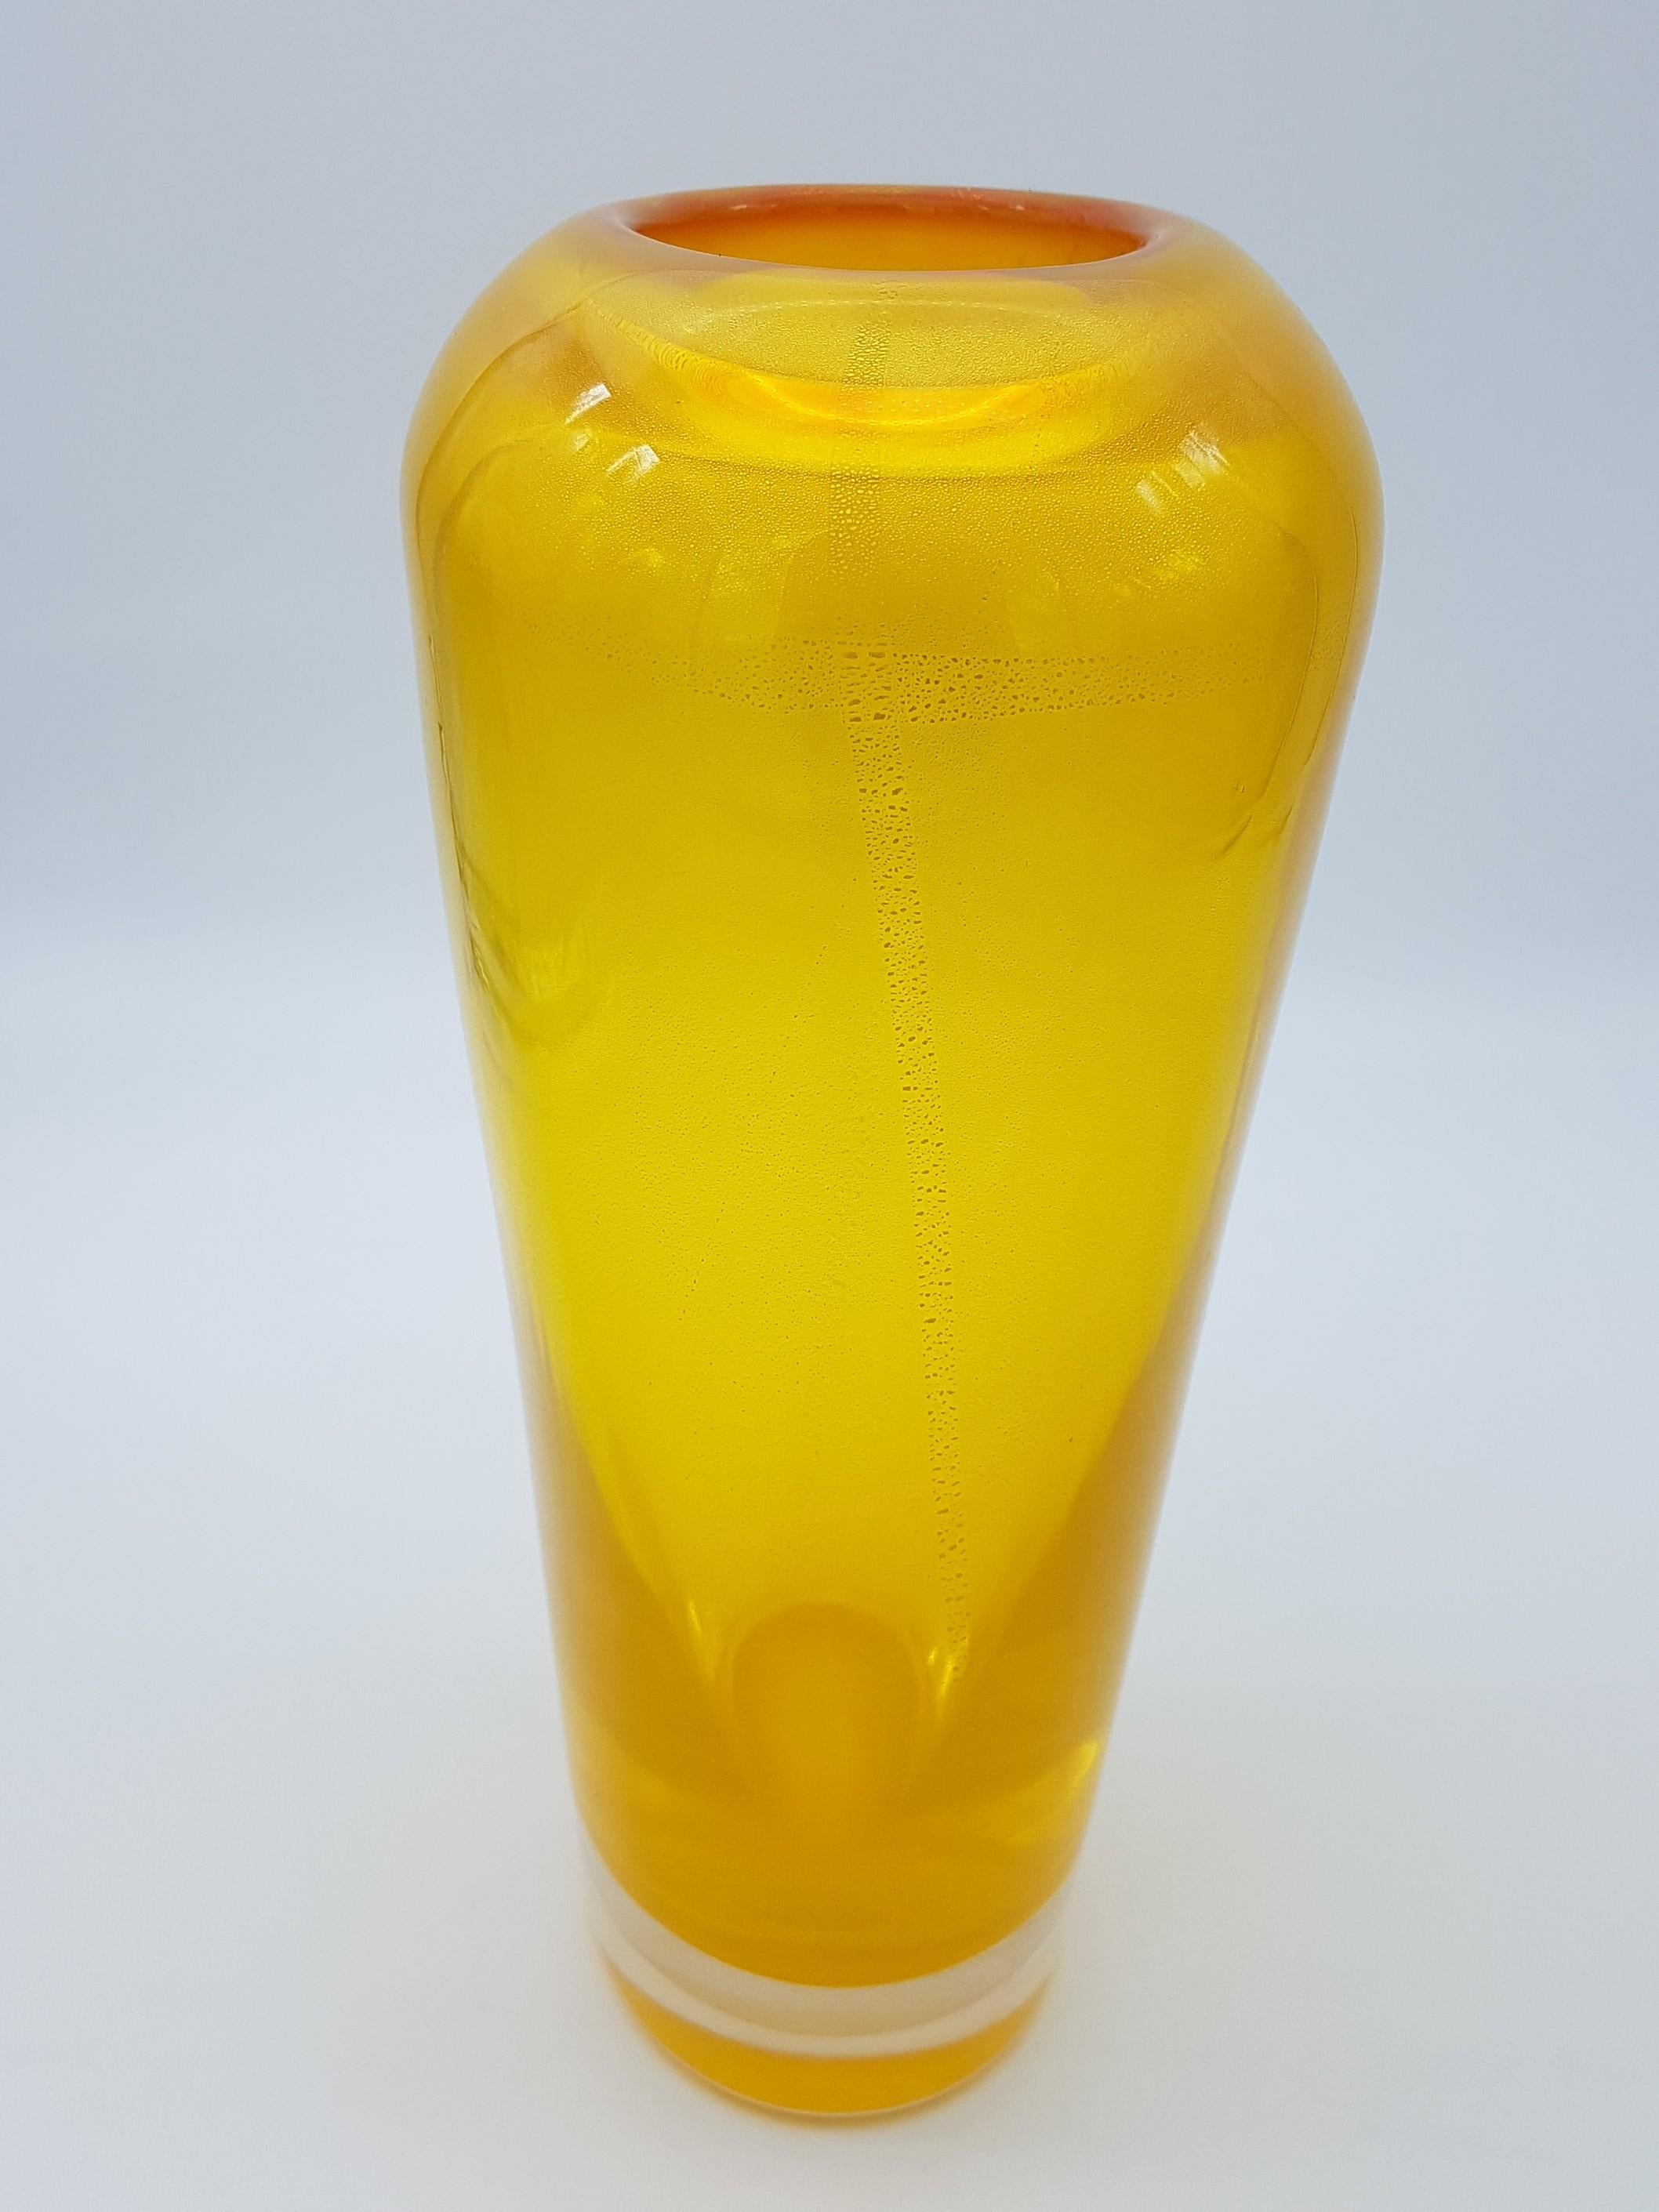 Modern Murano Glass Vase Gold Yellow Color by Cenedese, Late 1990s For Sale 5